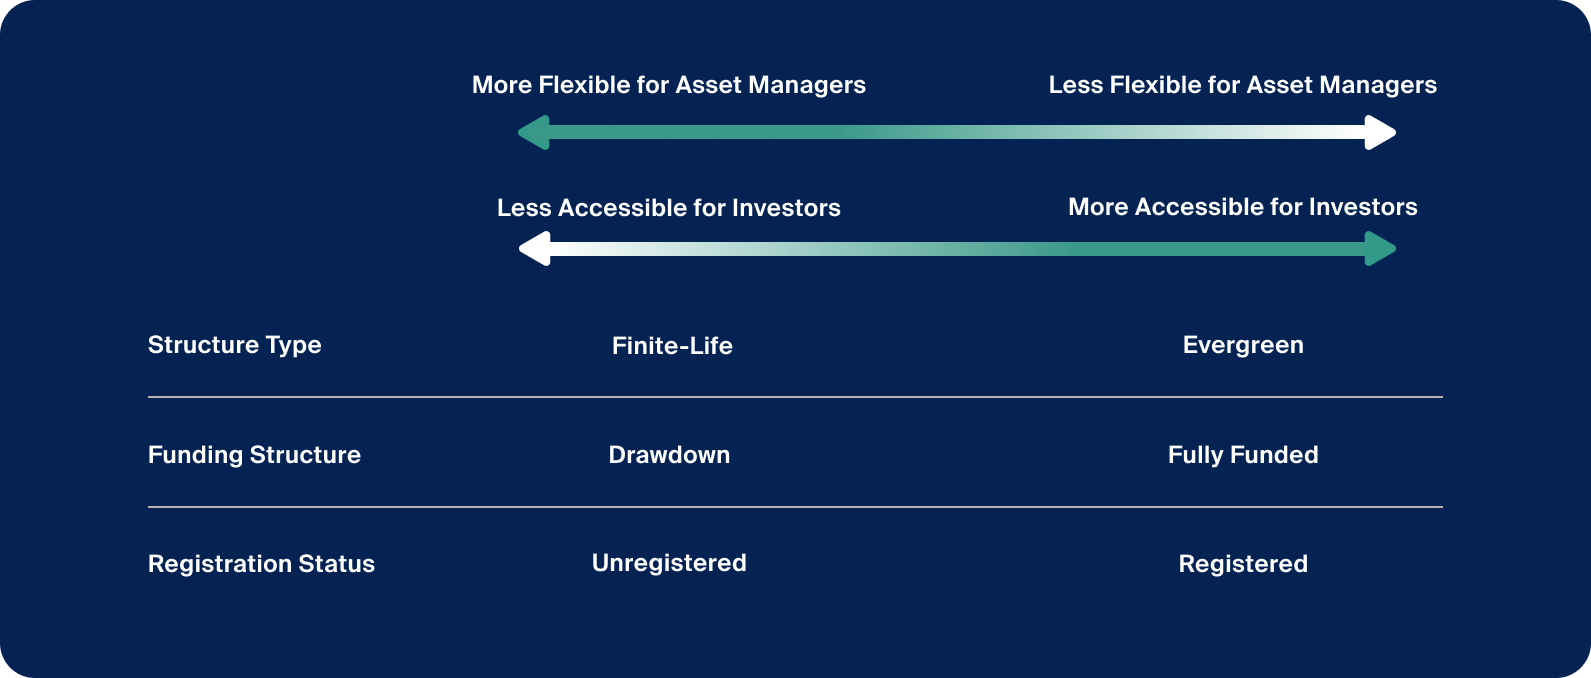 Different fund structure dimensions bring trade-offs for both asset managers and investors. (Exhibit 1)